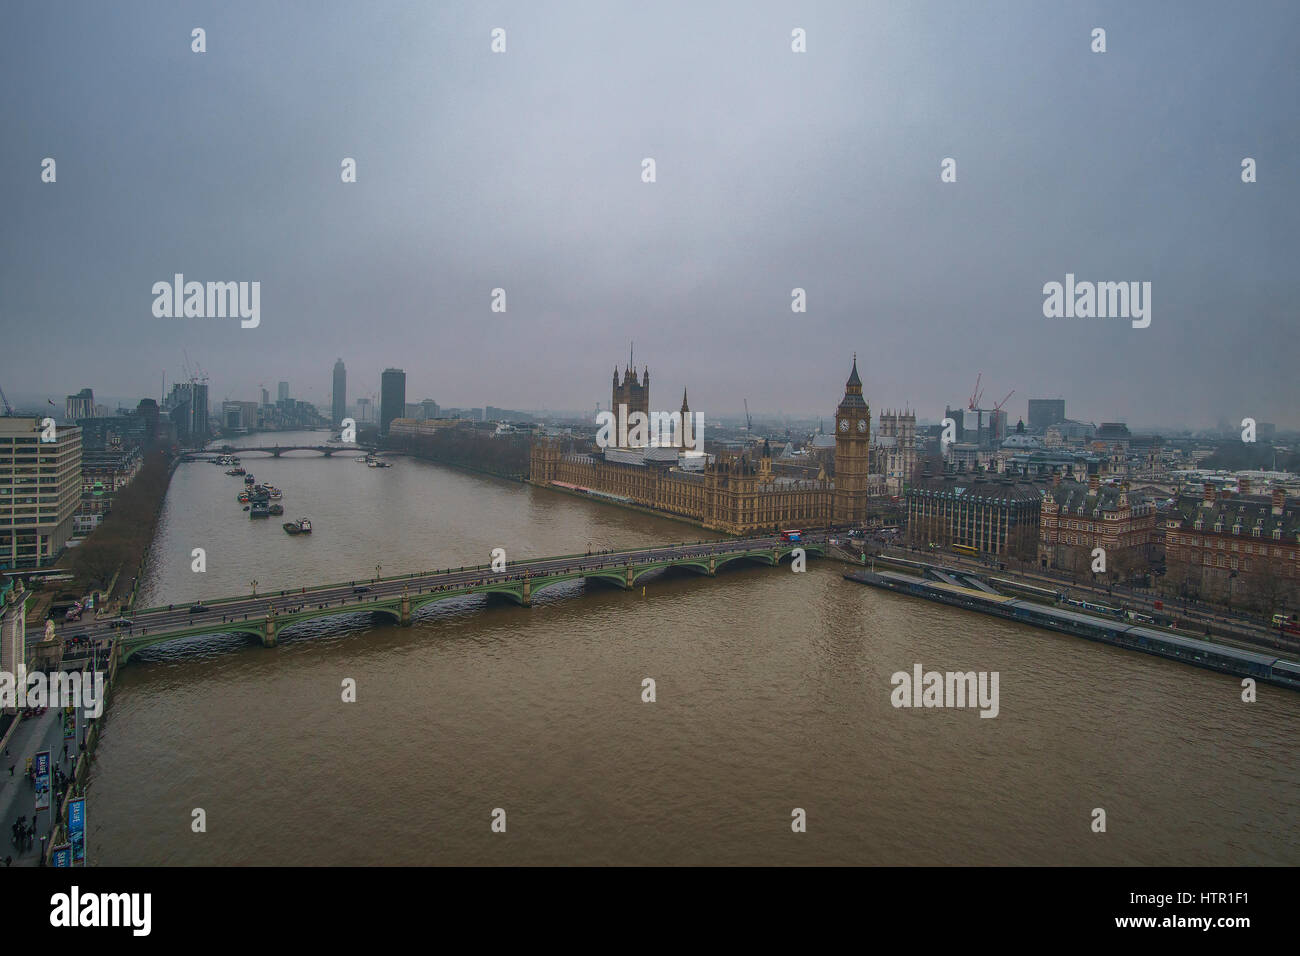 Panoramic Aerial view of Thames river in London against a cloudy sky in a foggy weather. London, United Kingdom. Stock Photo